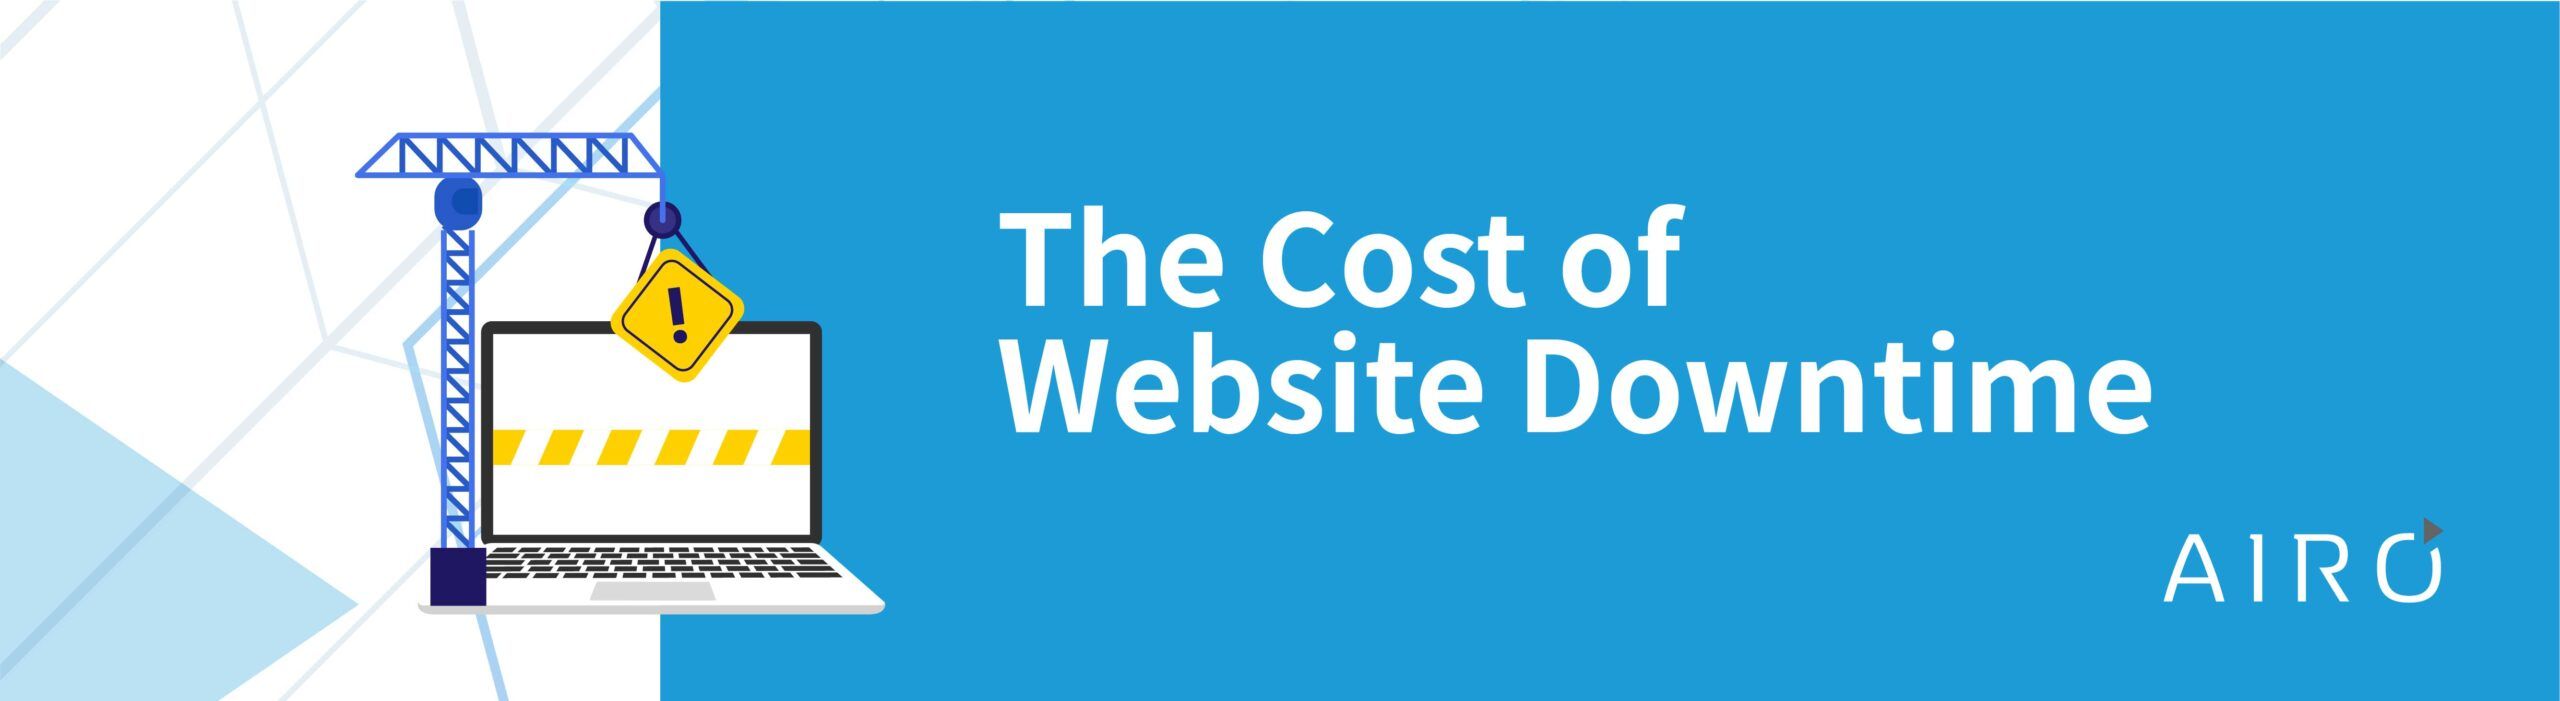 the cost of website downtime